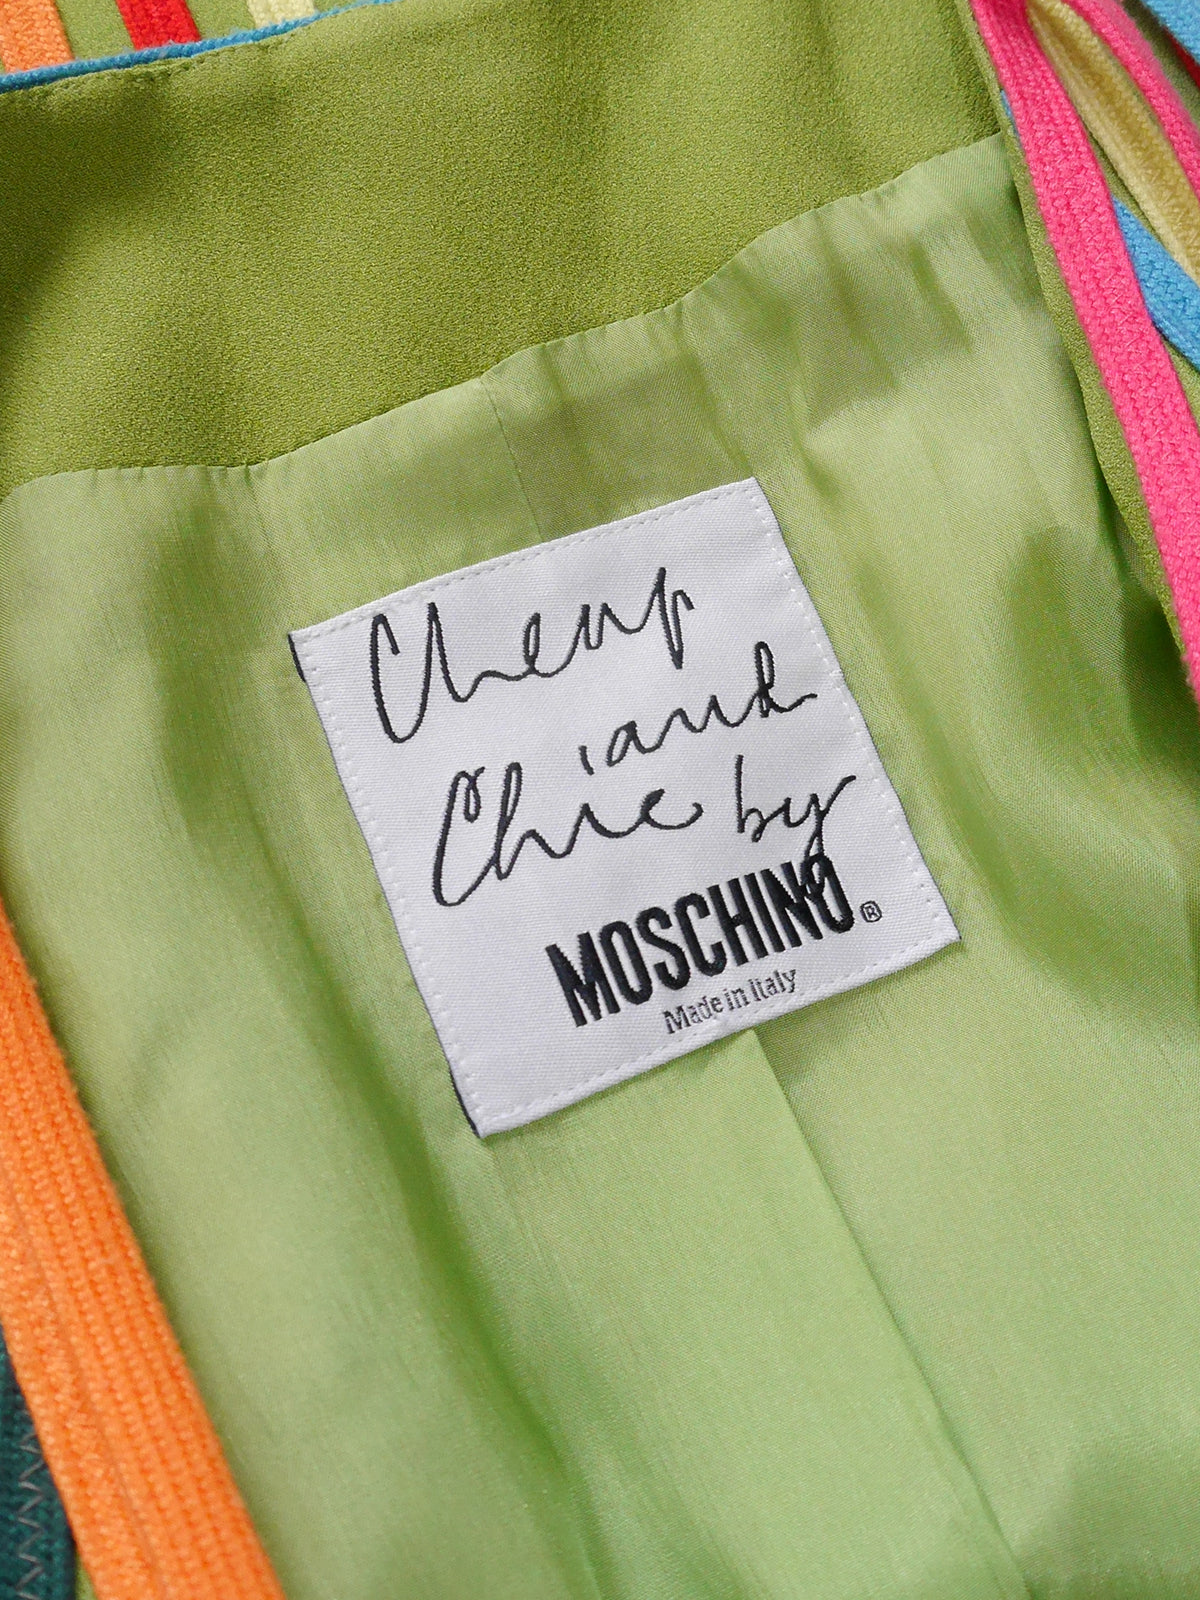 MOSCHINO 1990s Vintage Apple Green Shoe Lace Suit Skirt & Jacket